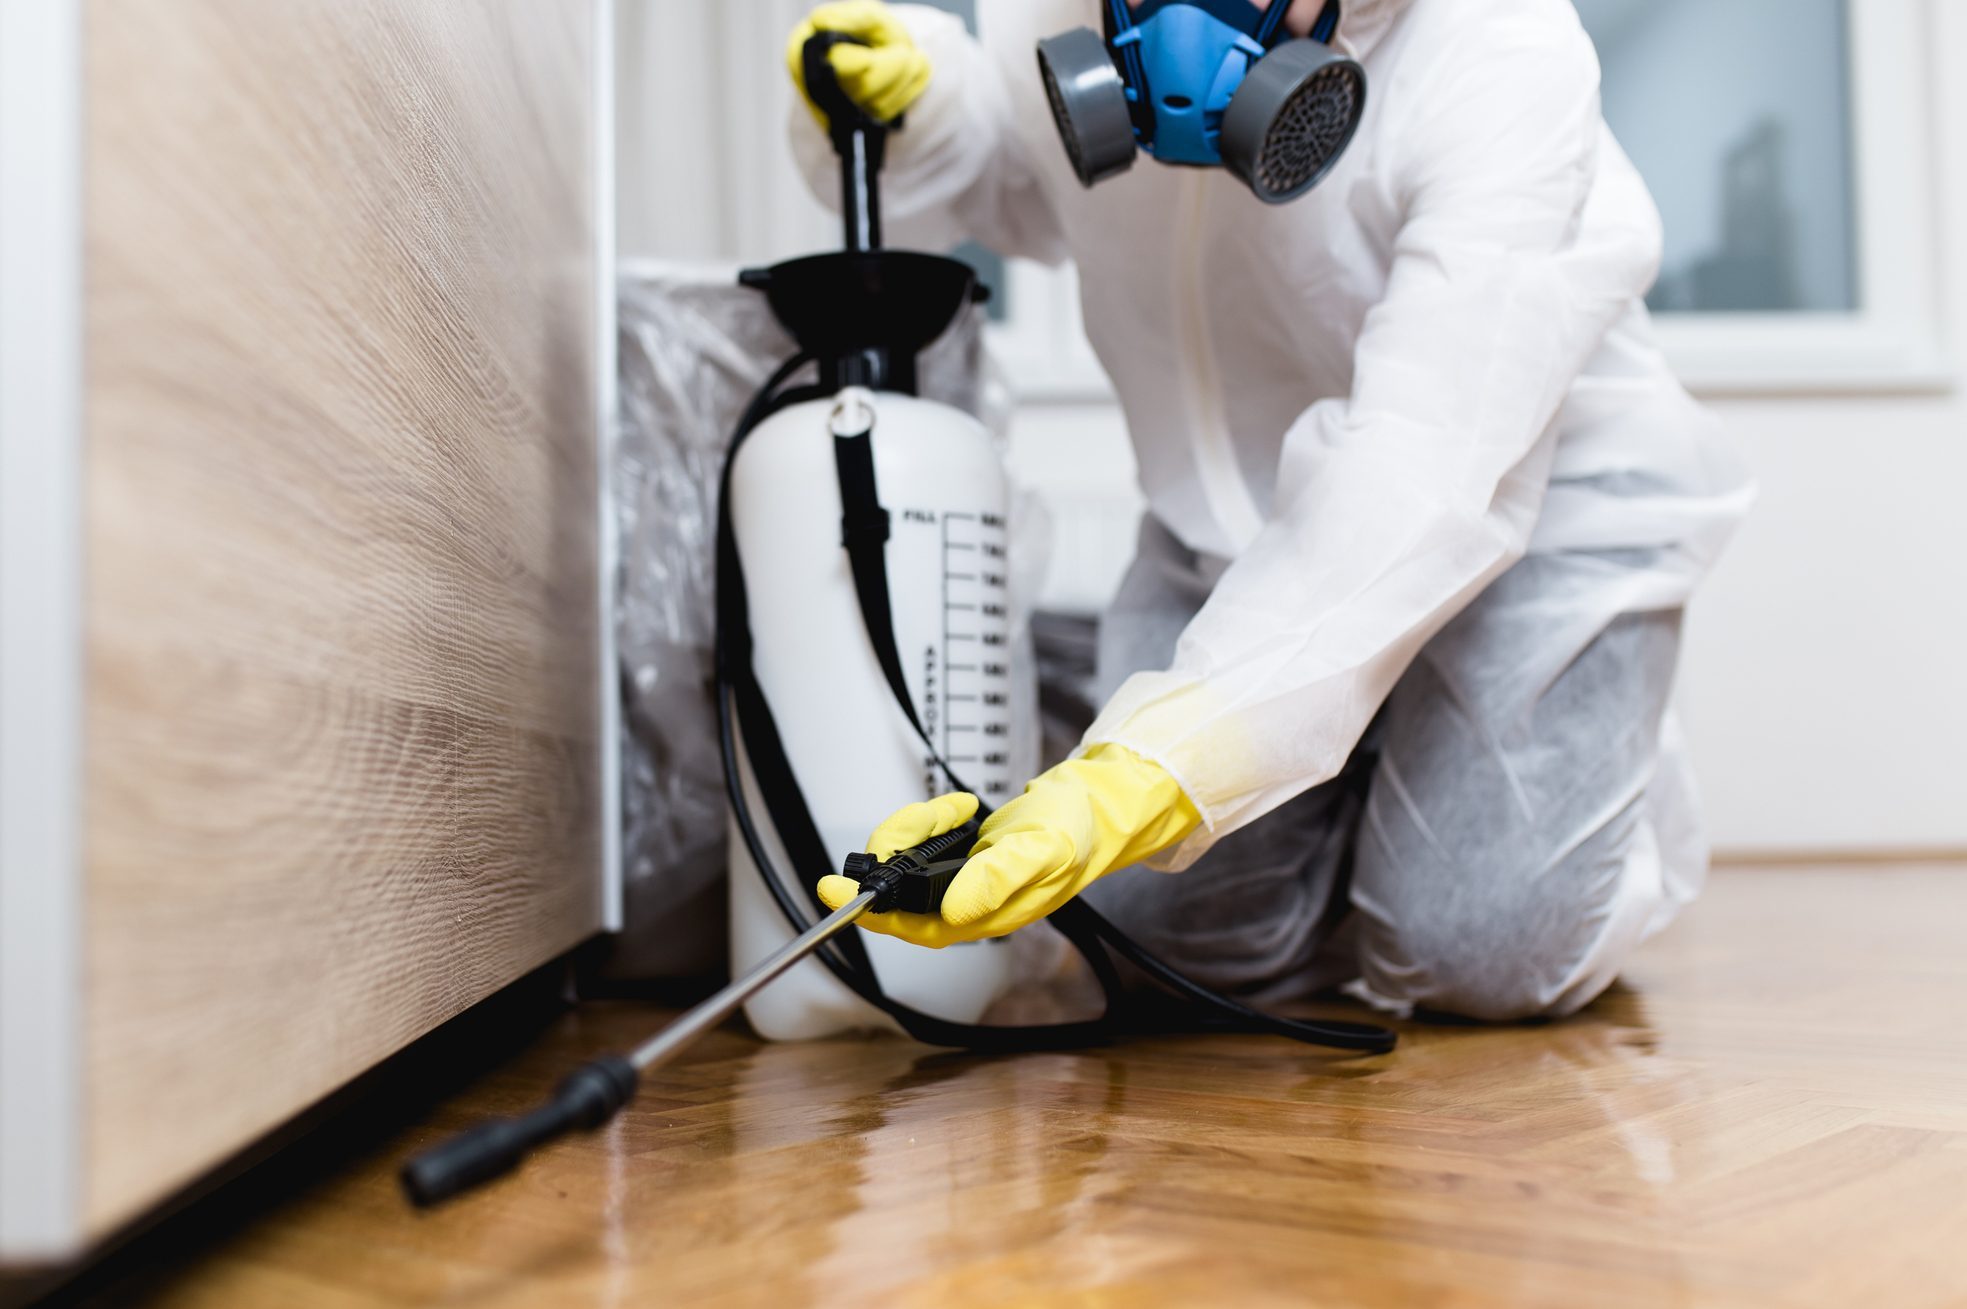 exterminator in protective gear spraying insecticide inside a home for cockroaches